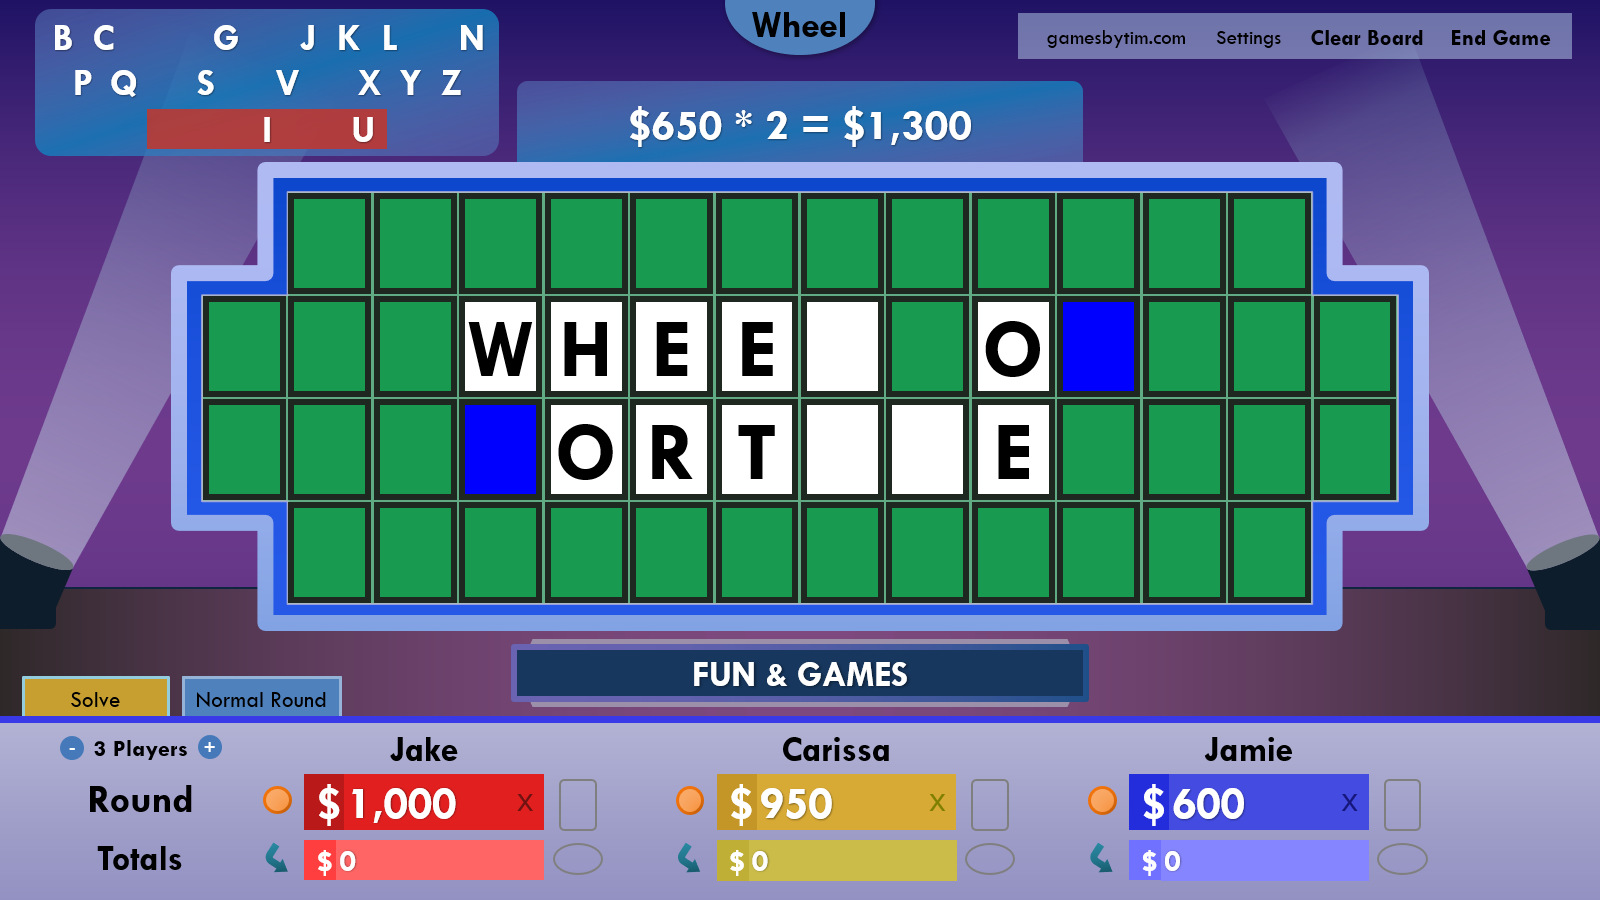 games - Wheel of Fortune for PowerPoint - Games by Tim - Game WoFPPTScreenshot